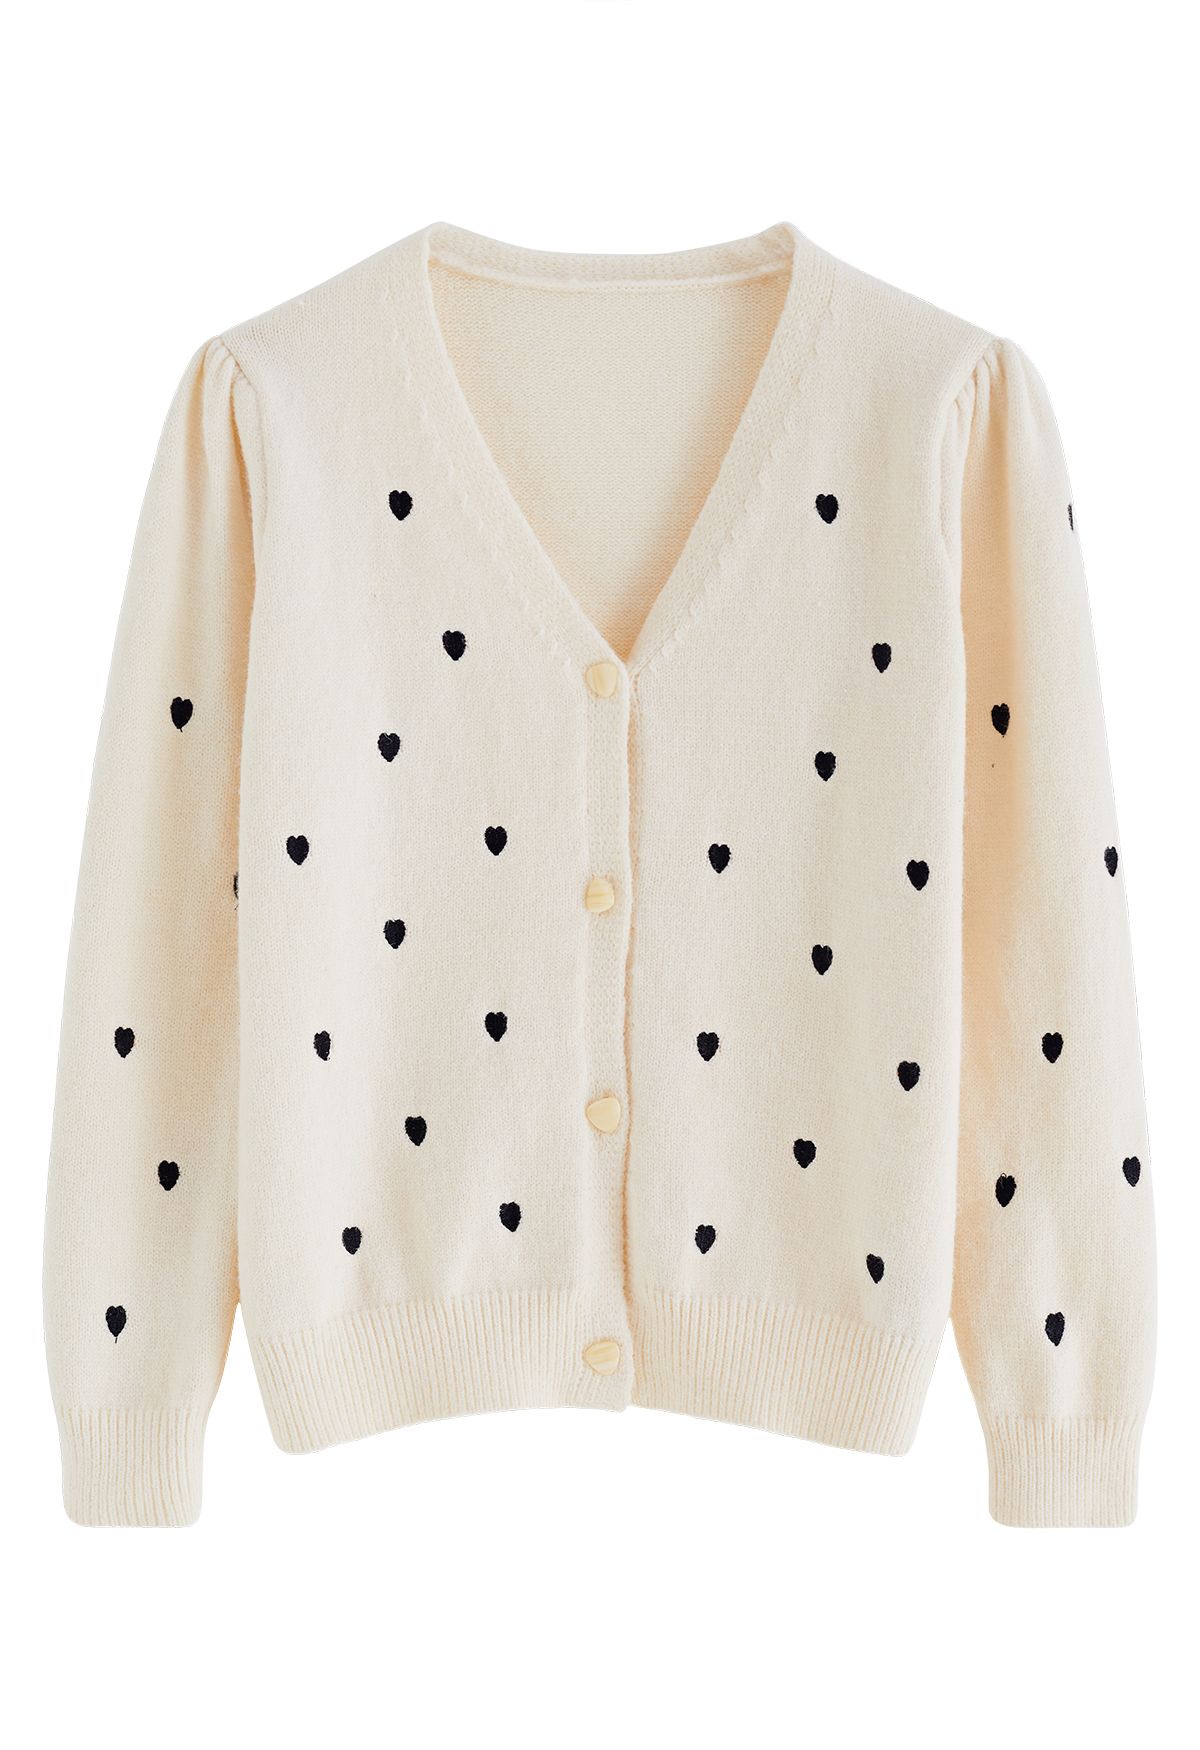 Little Heart Embroideried Button-Up Cardigan in White - Retro, Indie ...